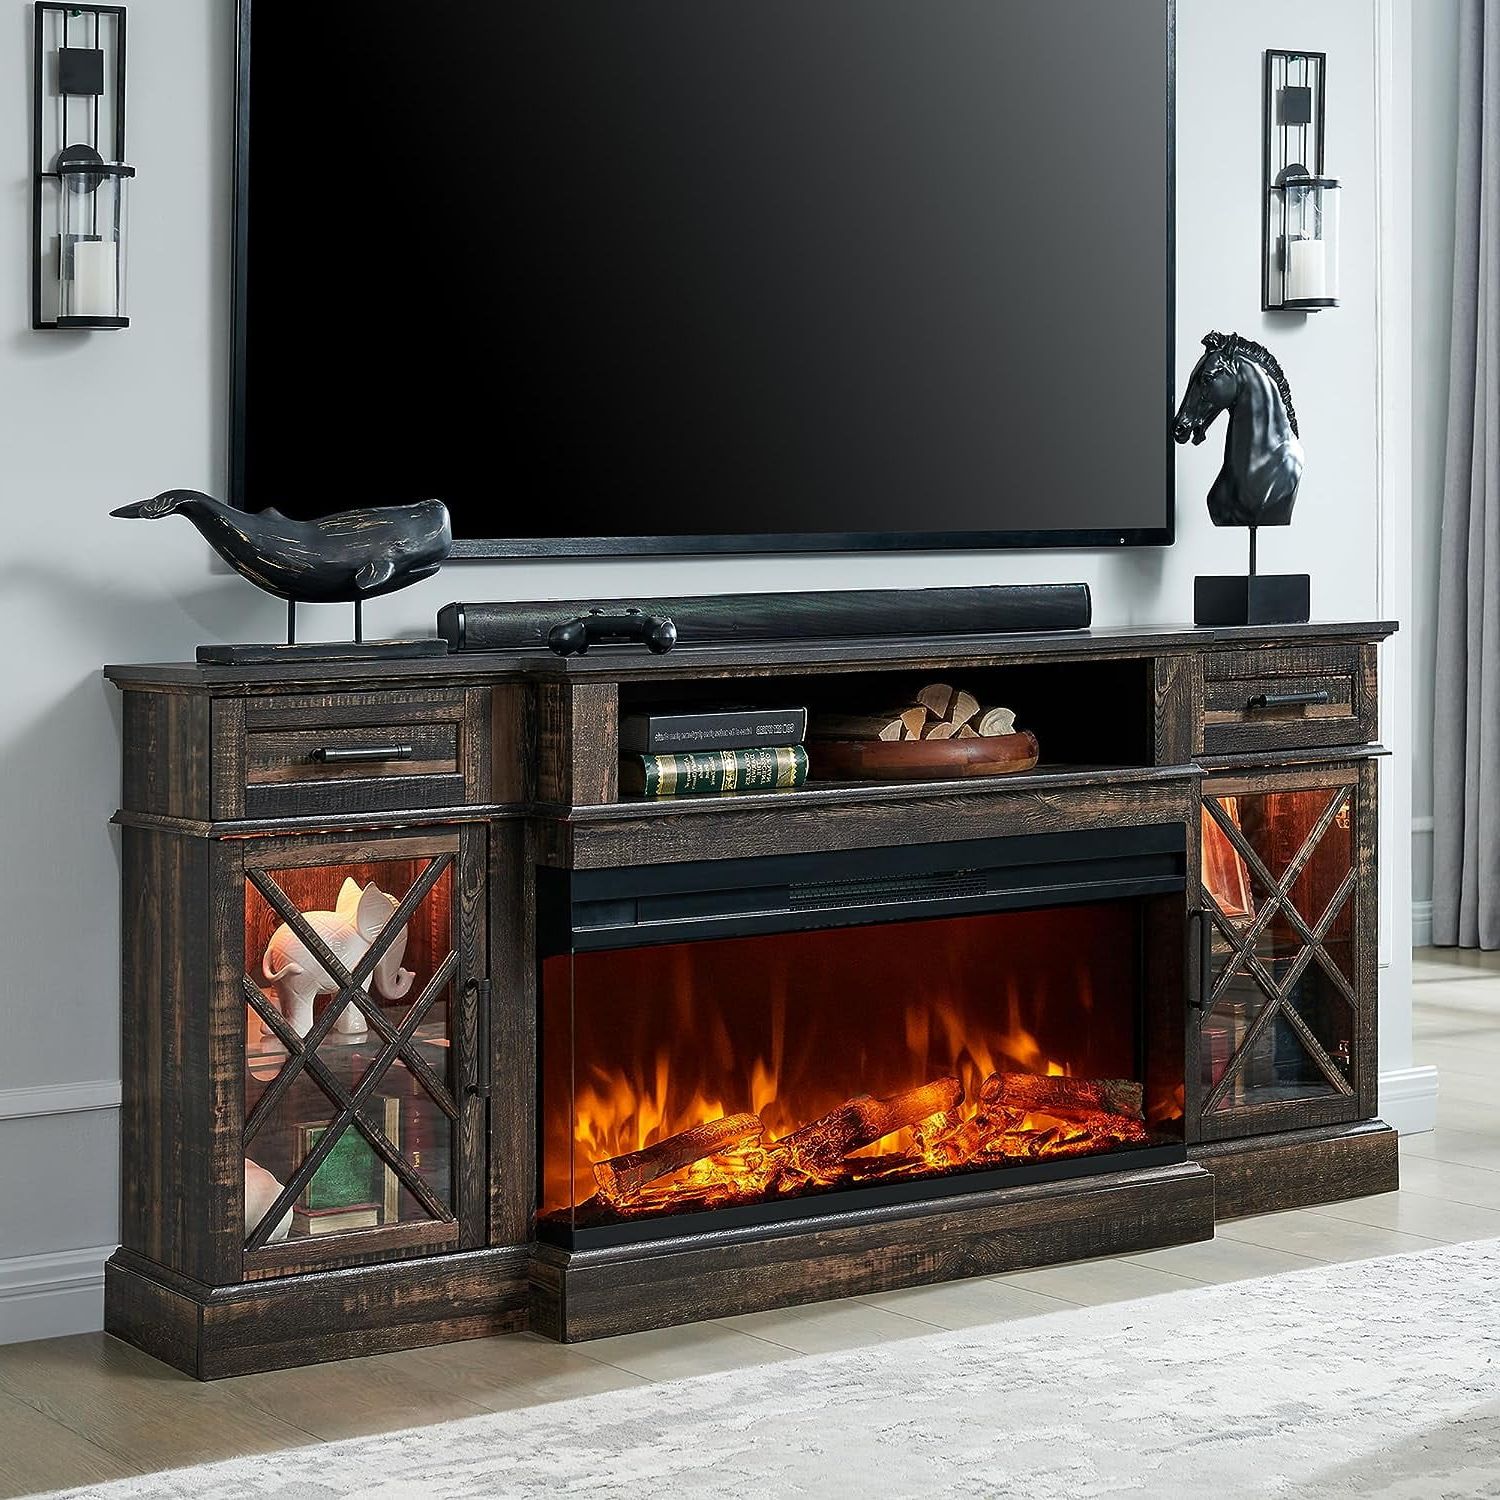 Okd 3 Sided Glass Farmhouse 70" Fireplace Tv Stand For Tvs Up To 80",  Highboy Entertainment Center With 36" Electric Fireplace, Dark Rustic Oak –  Walmart Regarding Electric Fireplace Tv Stands (Gallery 19 of 20)